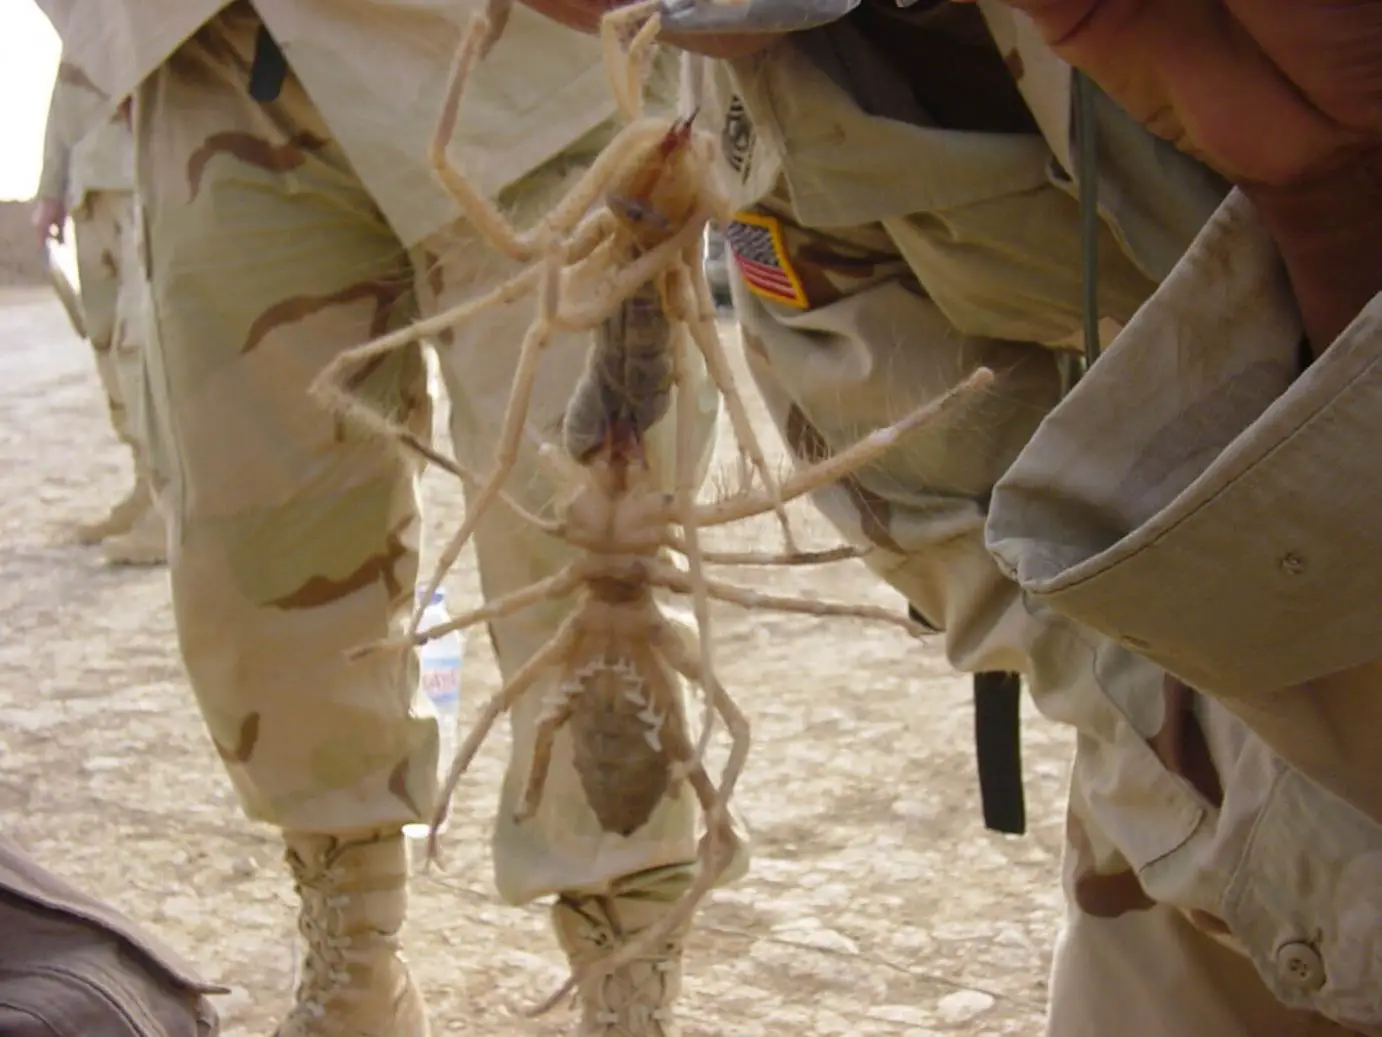 What Are Camel Spiders?